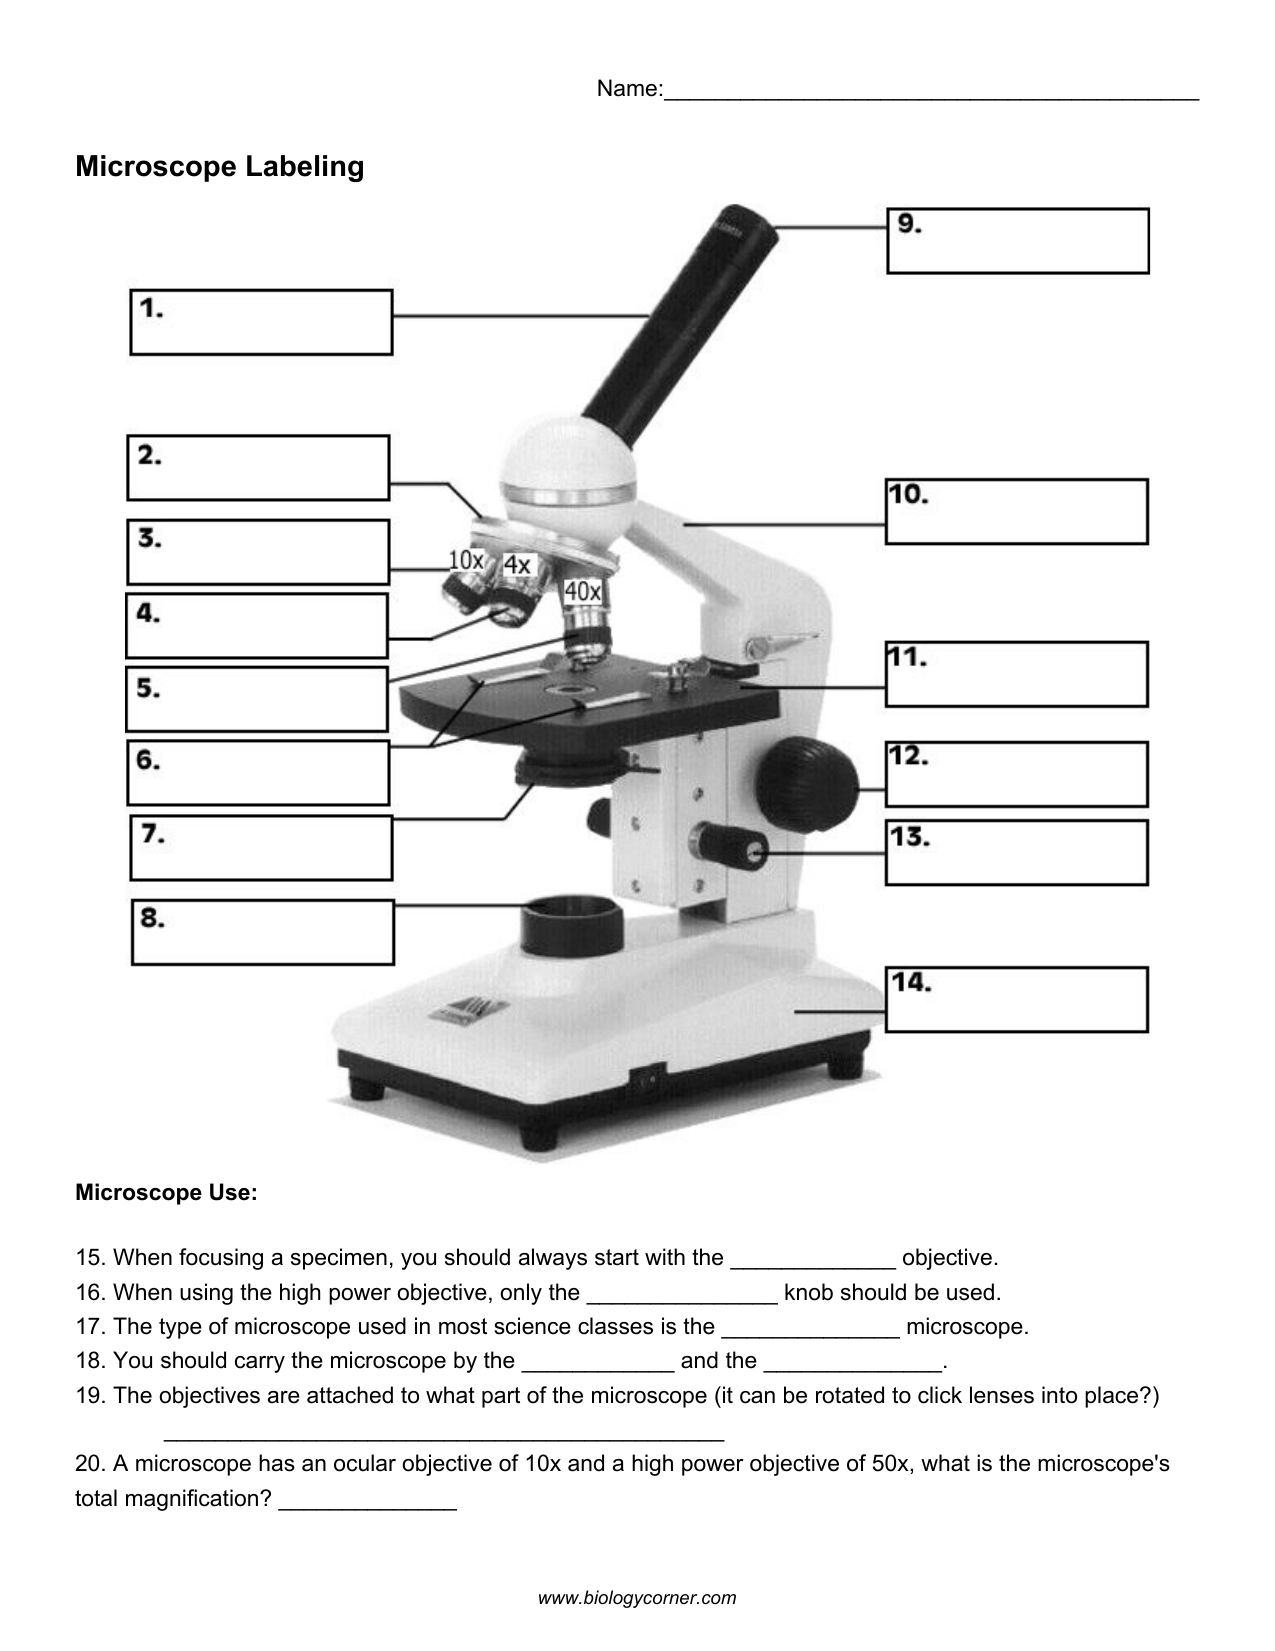 Microscope Parts Labeling Worksheet Throughout Microscope Parts And Use Worksheet